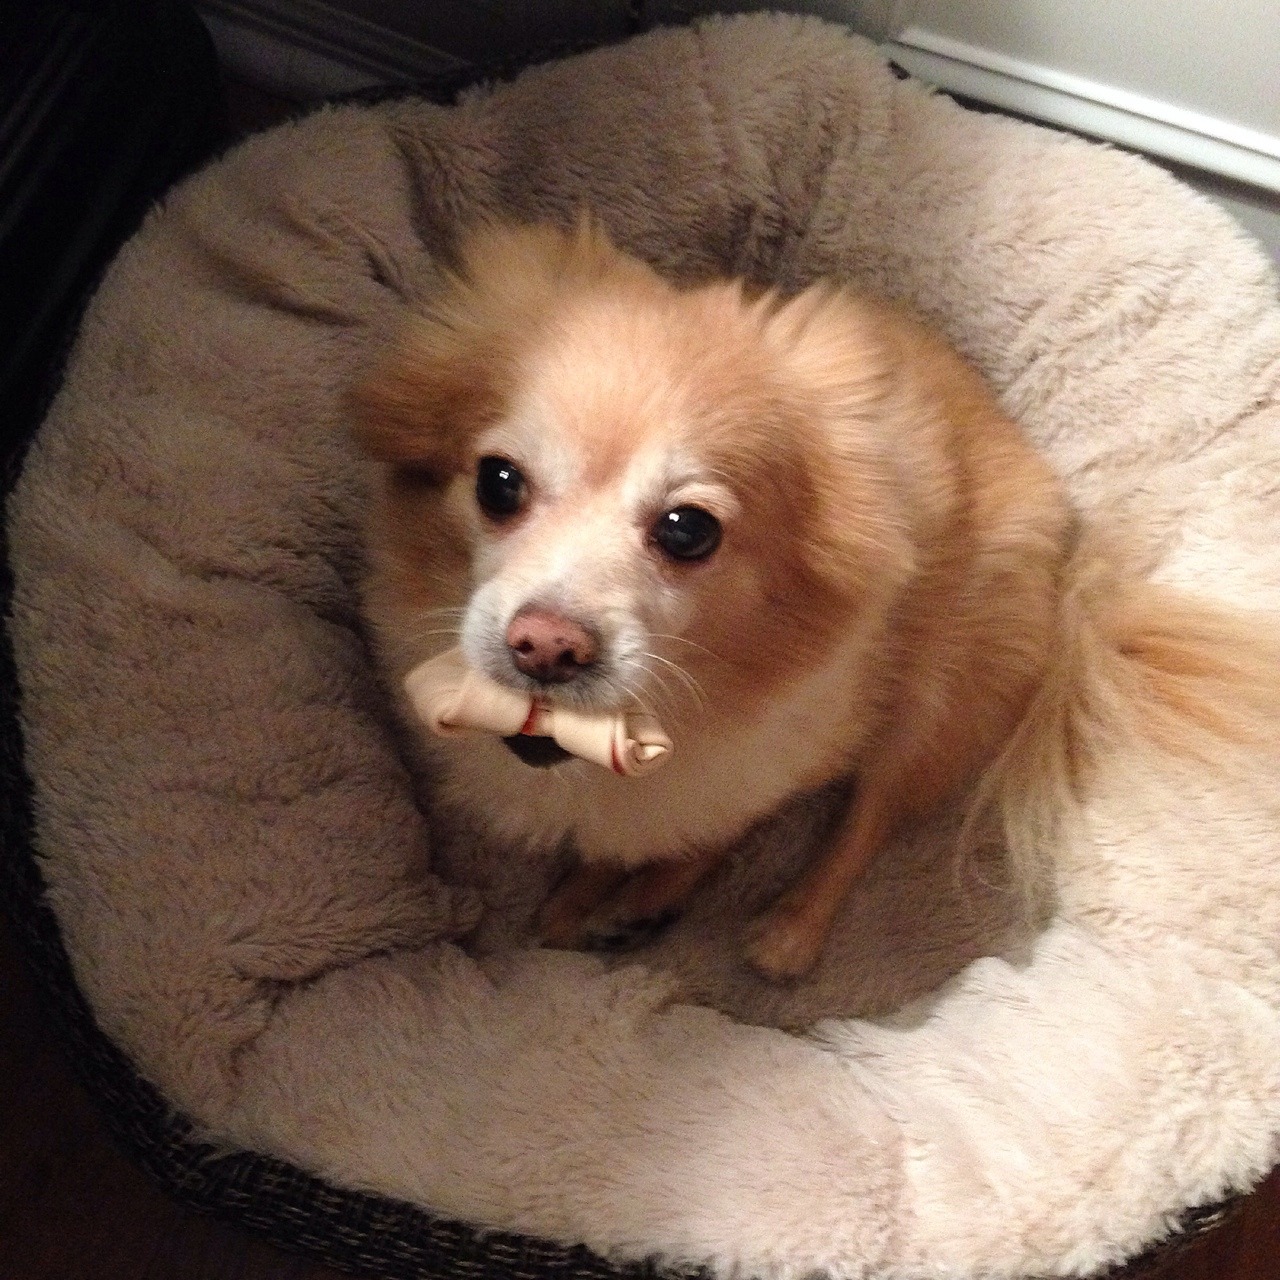 chickennuggetwastaken:
“ I don’t care if it’s bedtime. No one is taking my chew….I mean no one.
”
Nugget break.